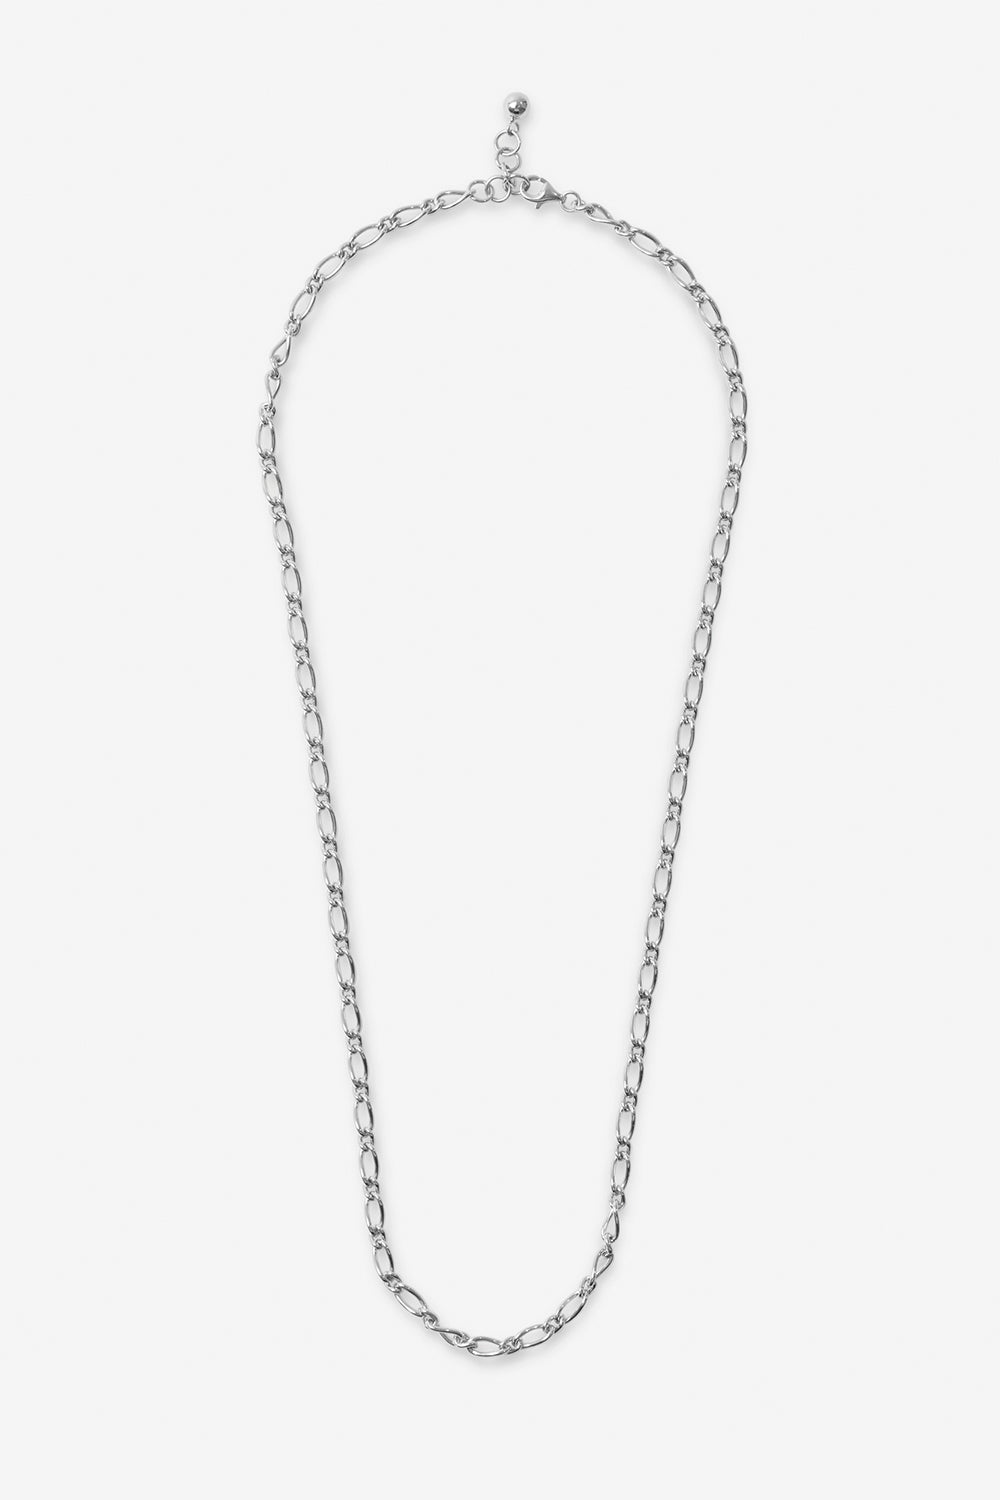 Lynkage Chain Necklace - Silver